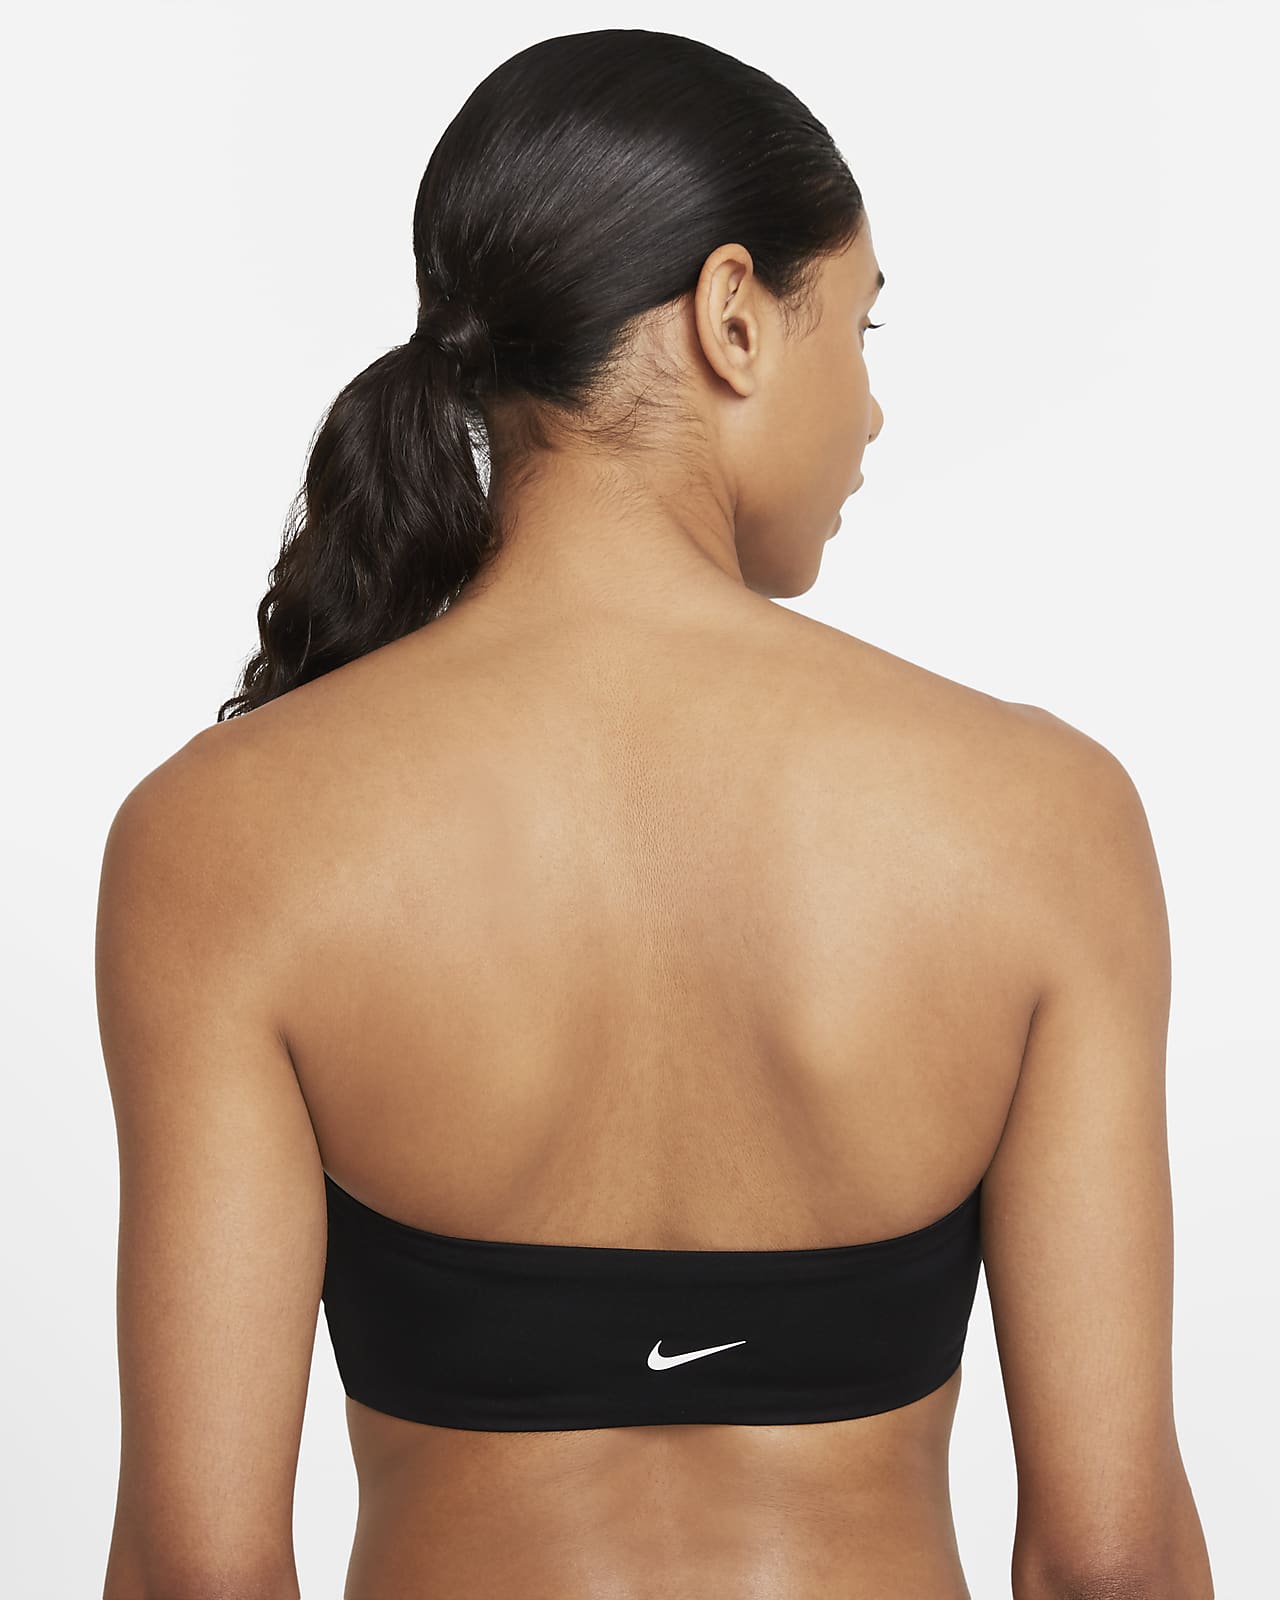 https://static.nike.com/a/images/t_PDP_1280_v1/f_auto,q_auto:eco/3863ac41-72e0-4996-8b02-76ceb6b8b56a/bandeau-bikini-top-x0v8Wz.png